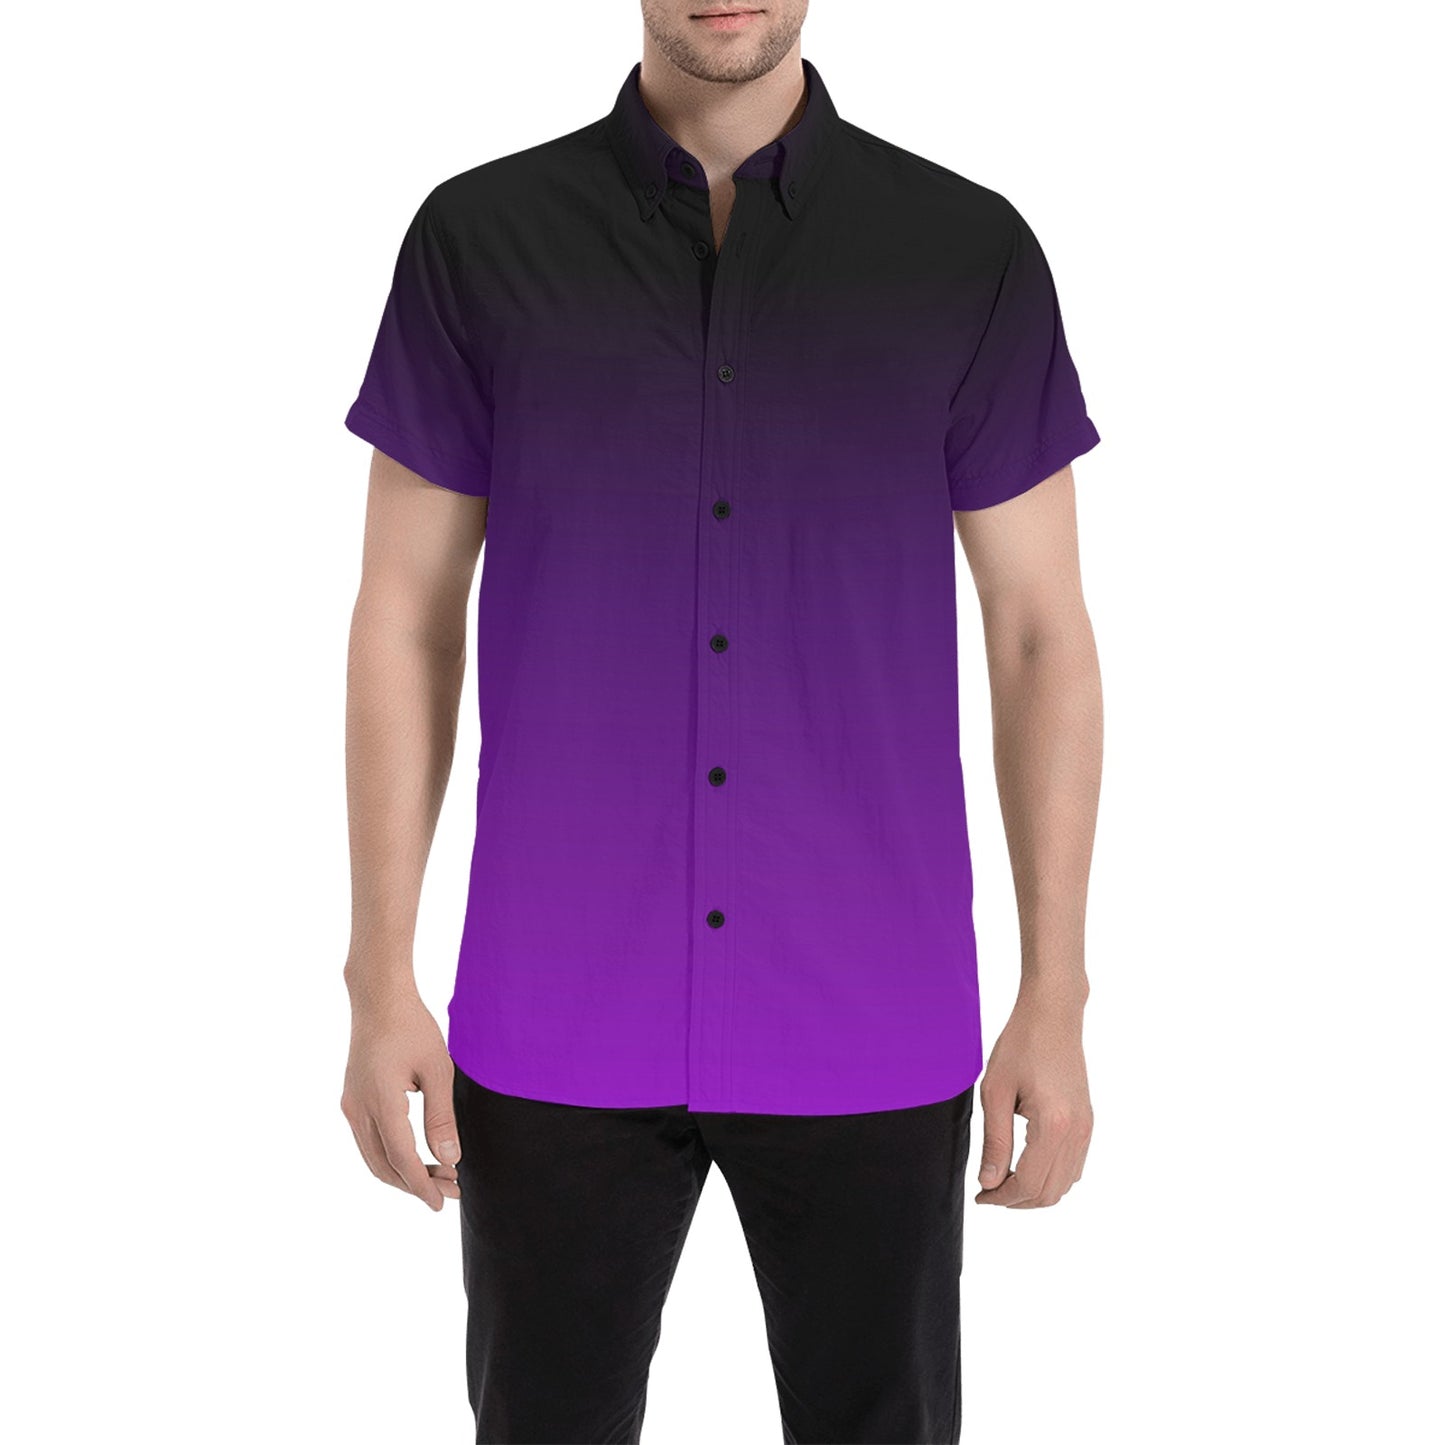 Black and Purple Short Sleeve Men Button Down Shirt, Ombre Tie Dye Gradient Print Casual Buttoned Summer Dress Collared Plus Size